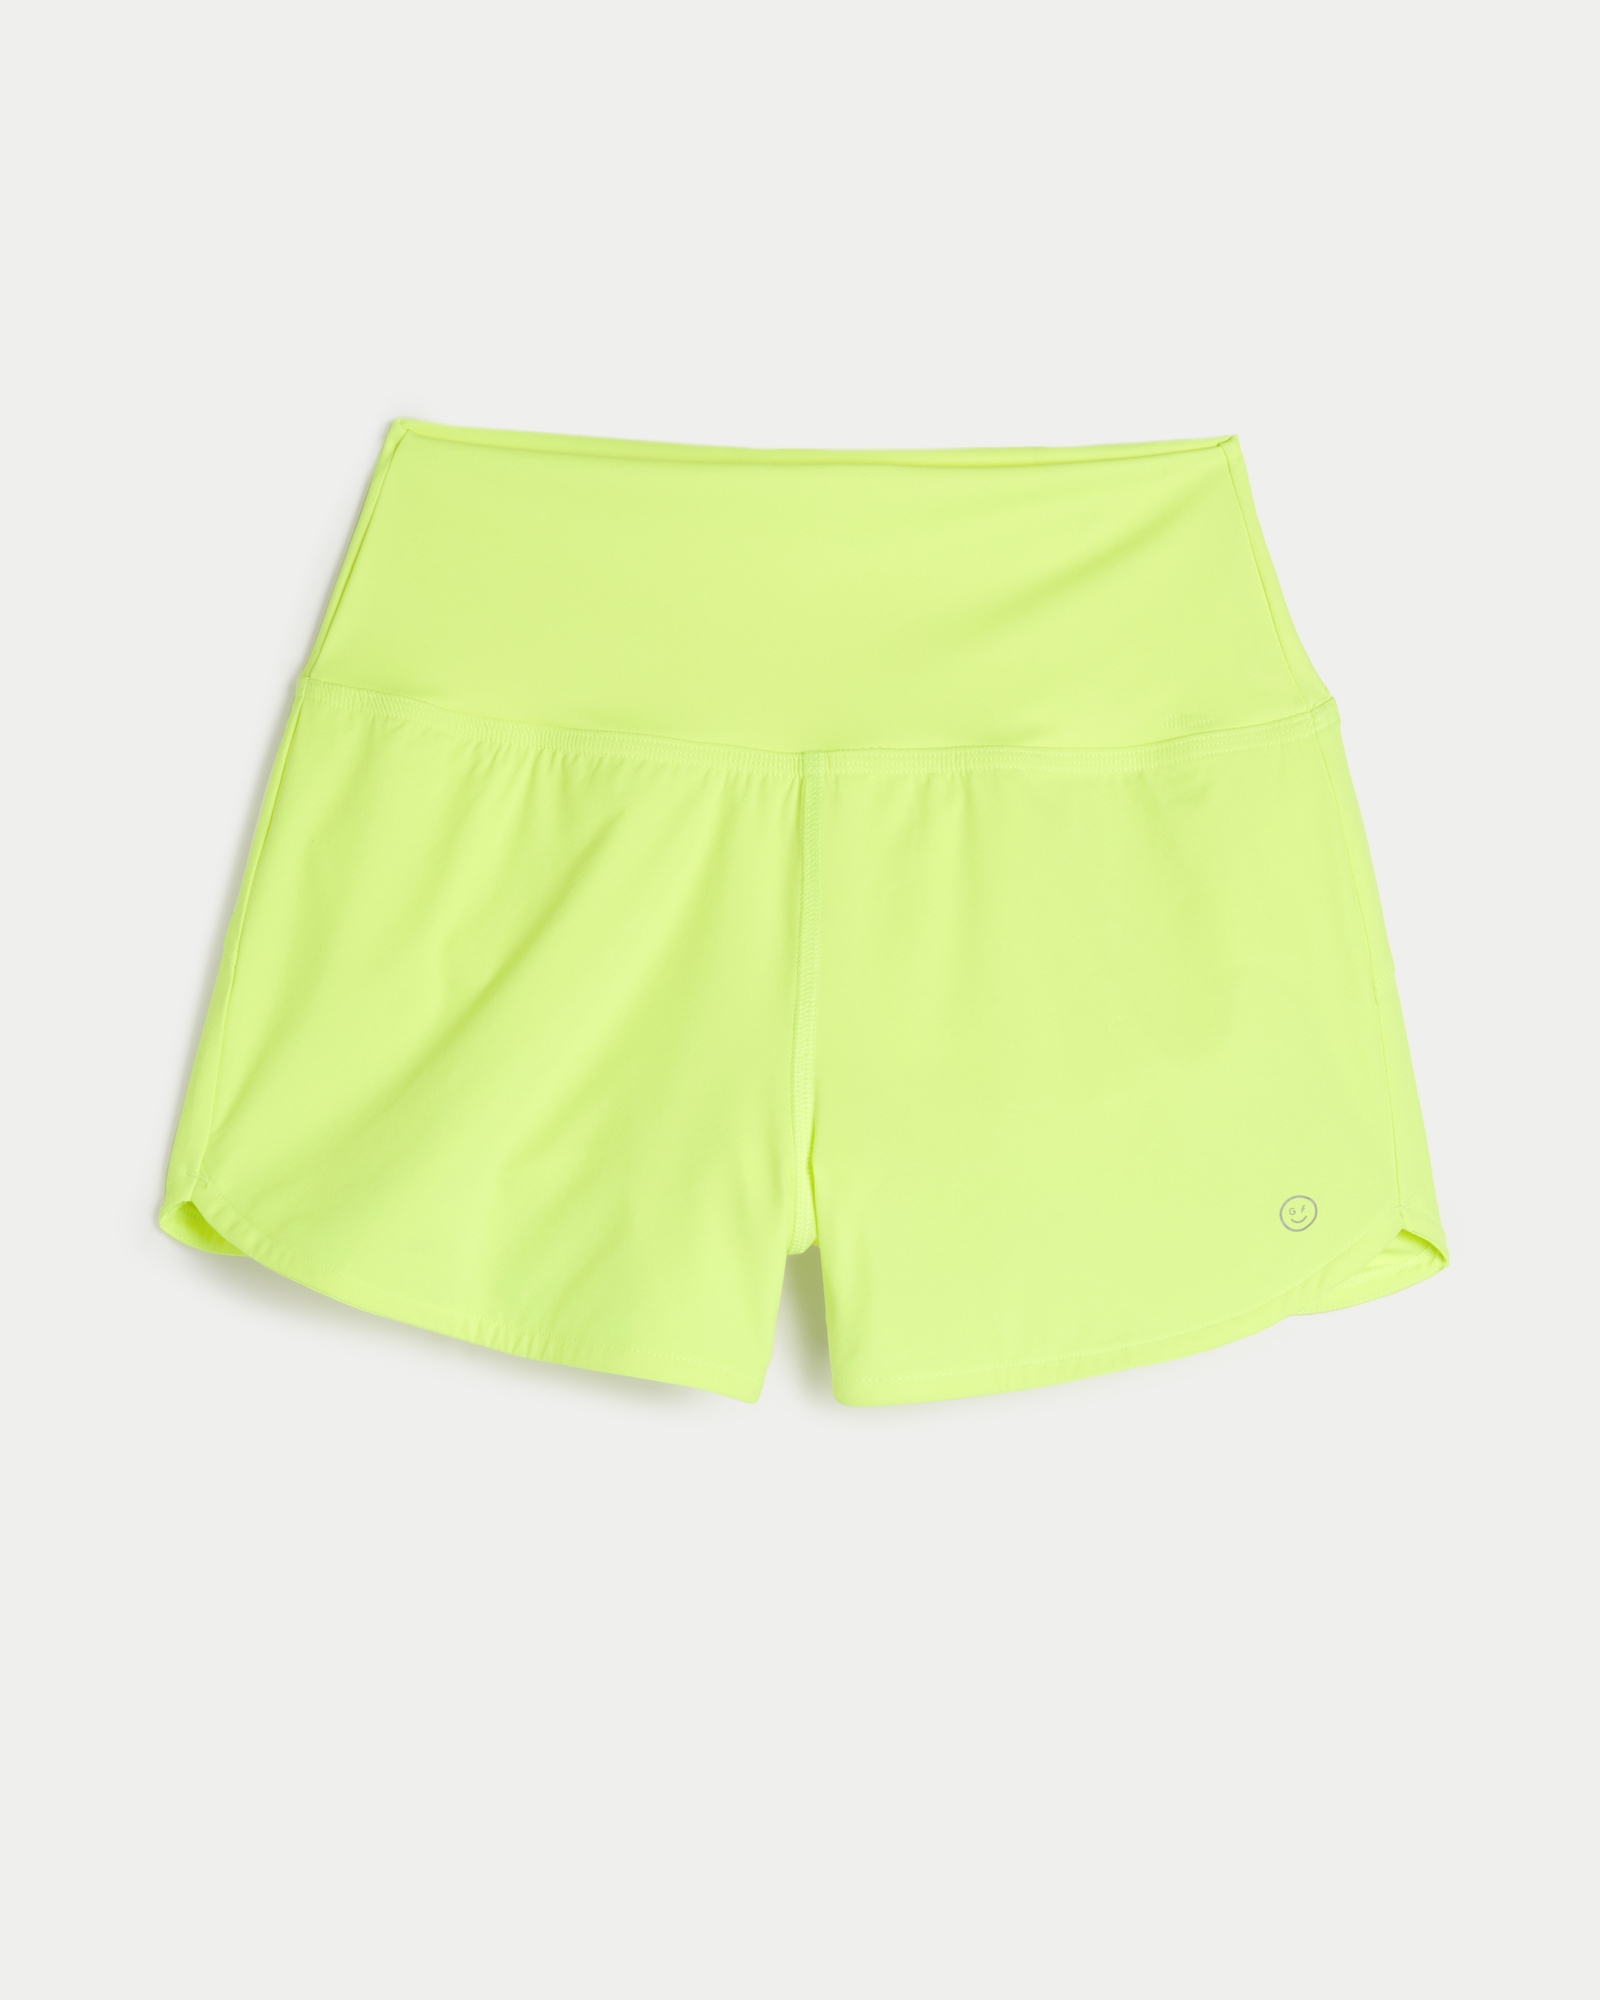 Men's Gilly Hicks Active Lined Shorts 5, Men's Clearance